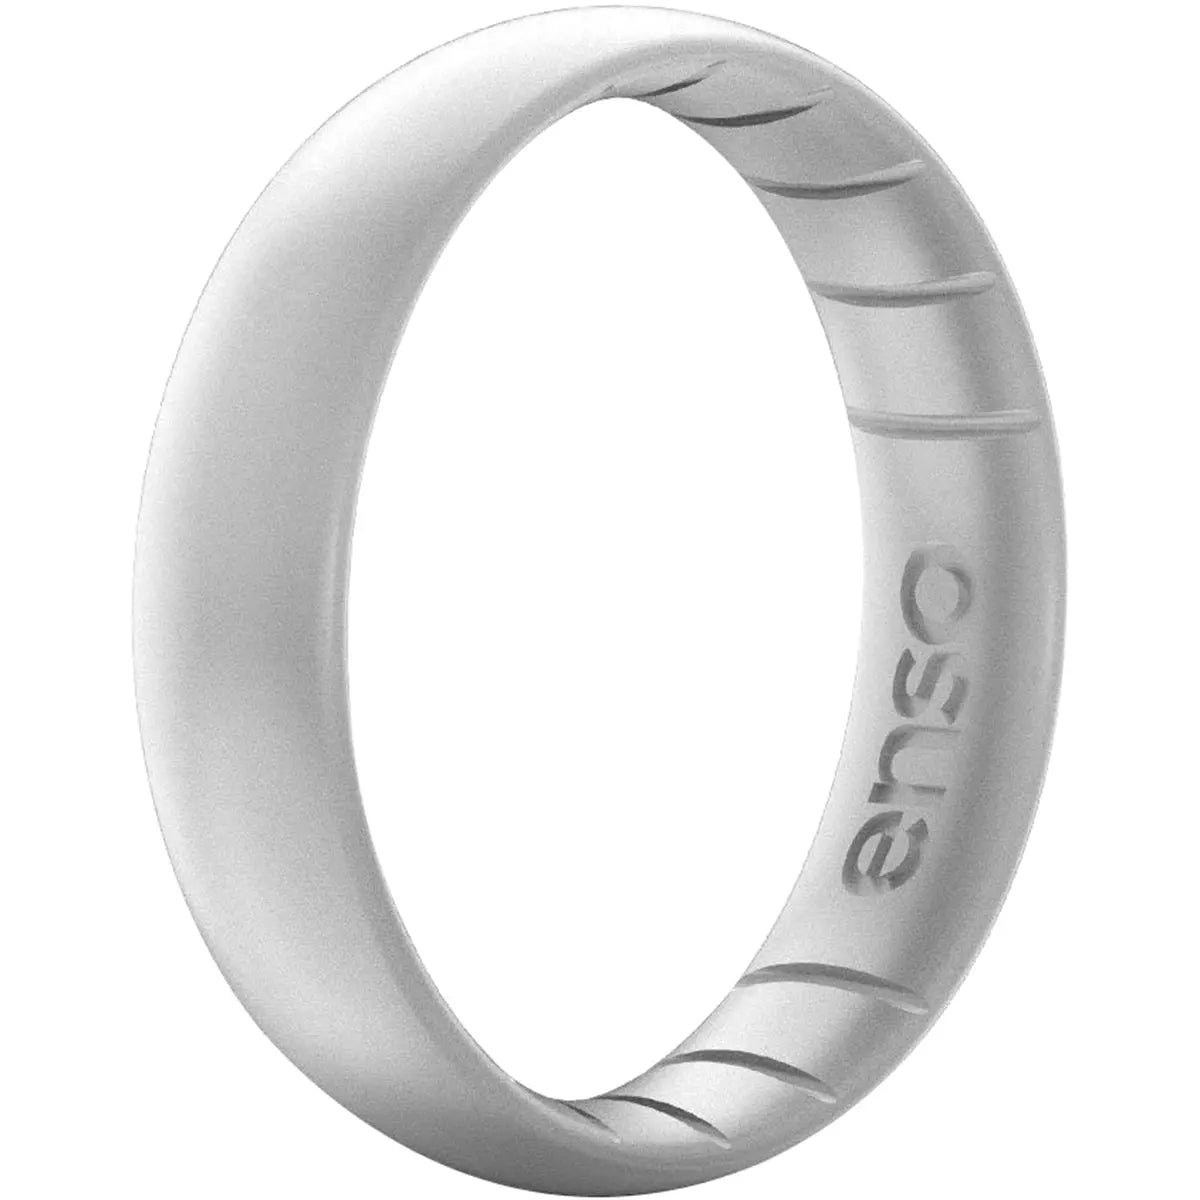 Enso Rings Thin Elements Series Silicone Ring Enso Rings